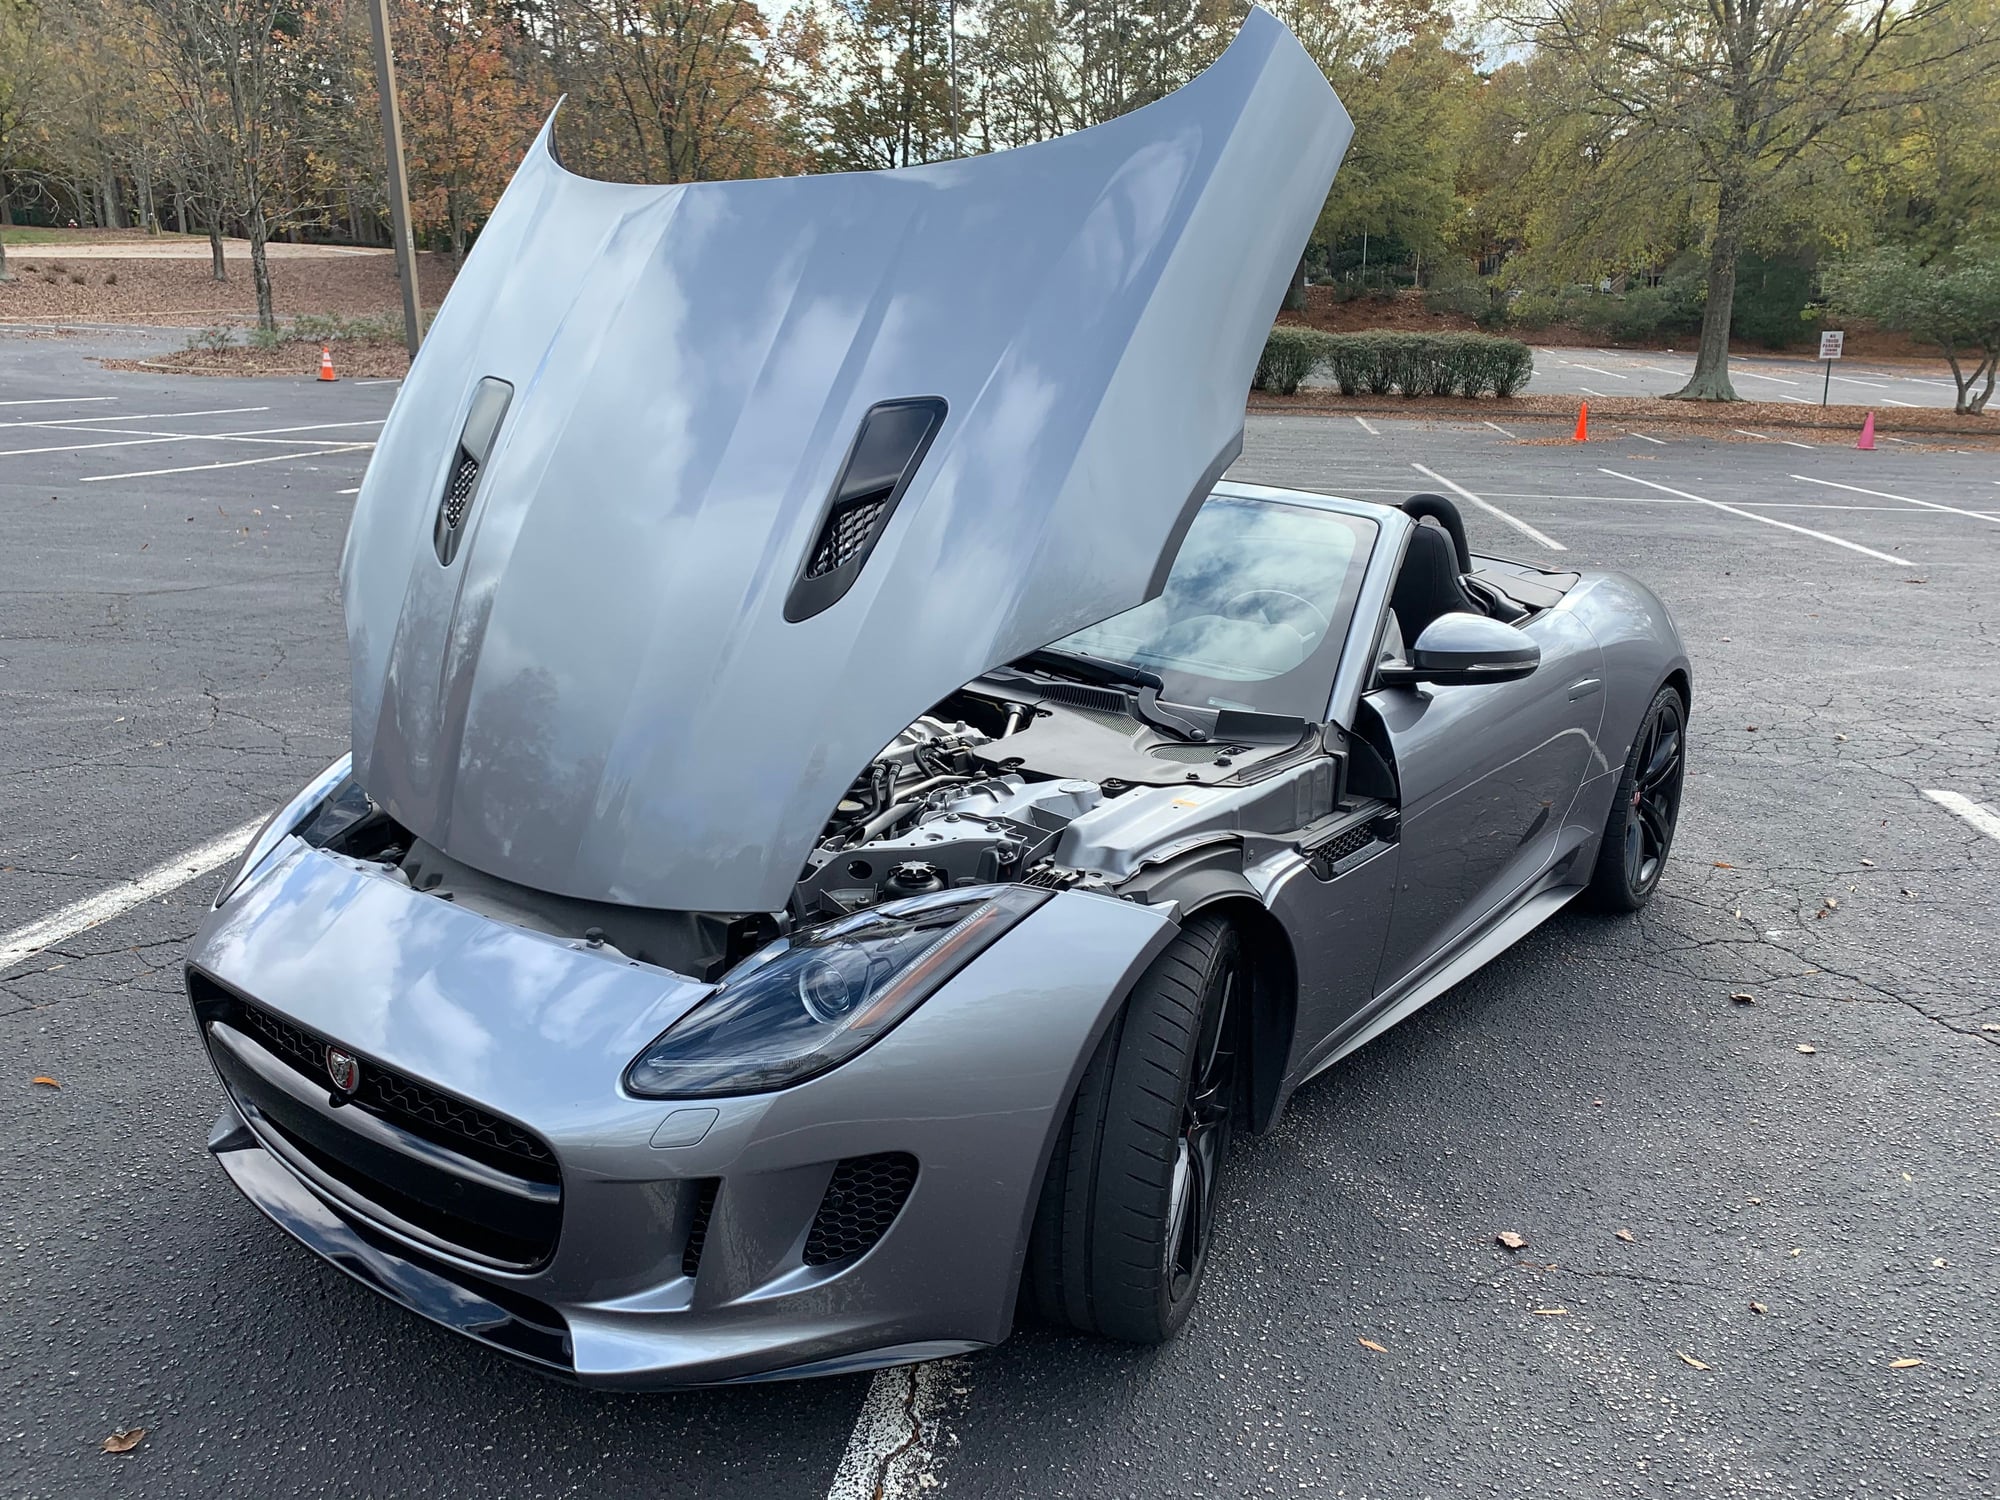 2015 Jaguar F-Type - 2015 F Type V8s 645 HP - Used - VIN sajwa6gl6fmk19011 - 32,000 Miles - 8 cyl - 2WD - Automatic - Convertible - Gray - Raleigh, NC 27612, United States